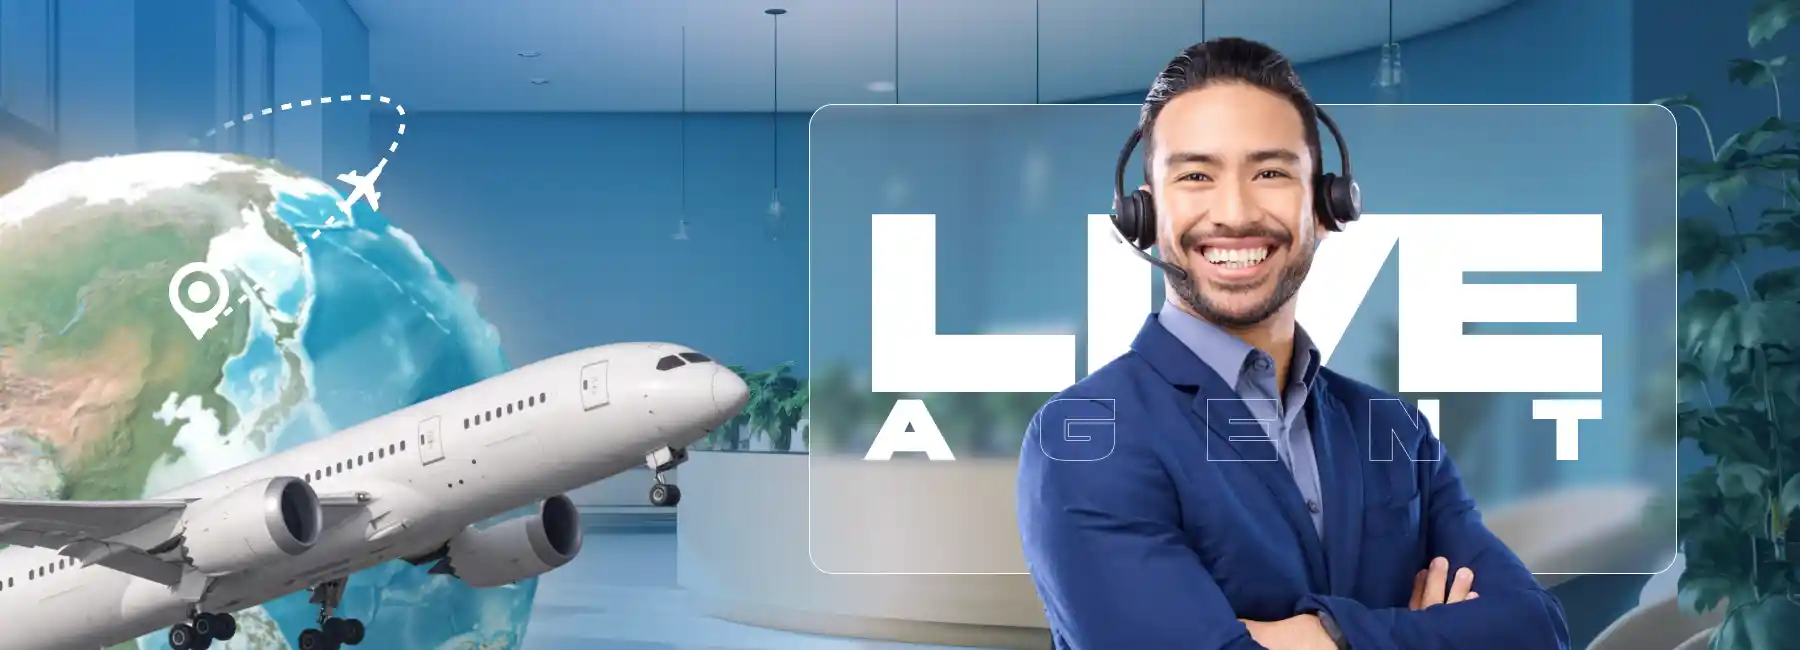 How Do I Speak To A Live Person At United Airlines